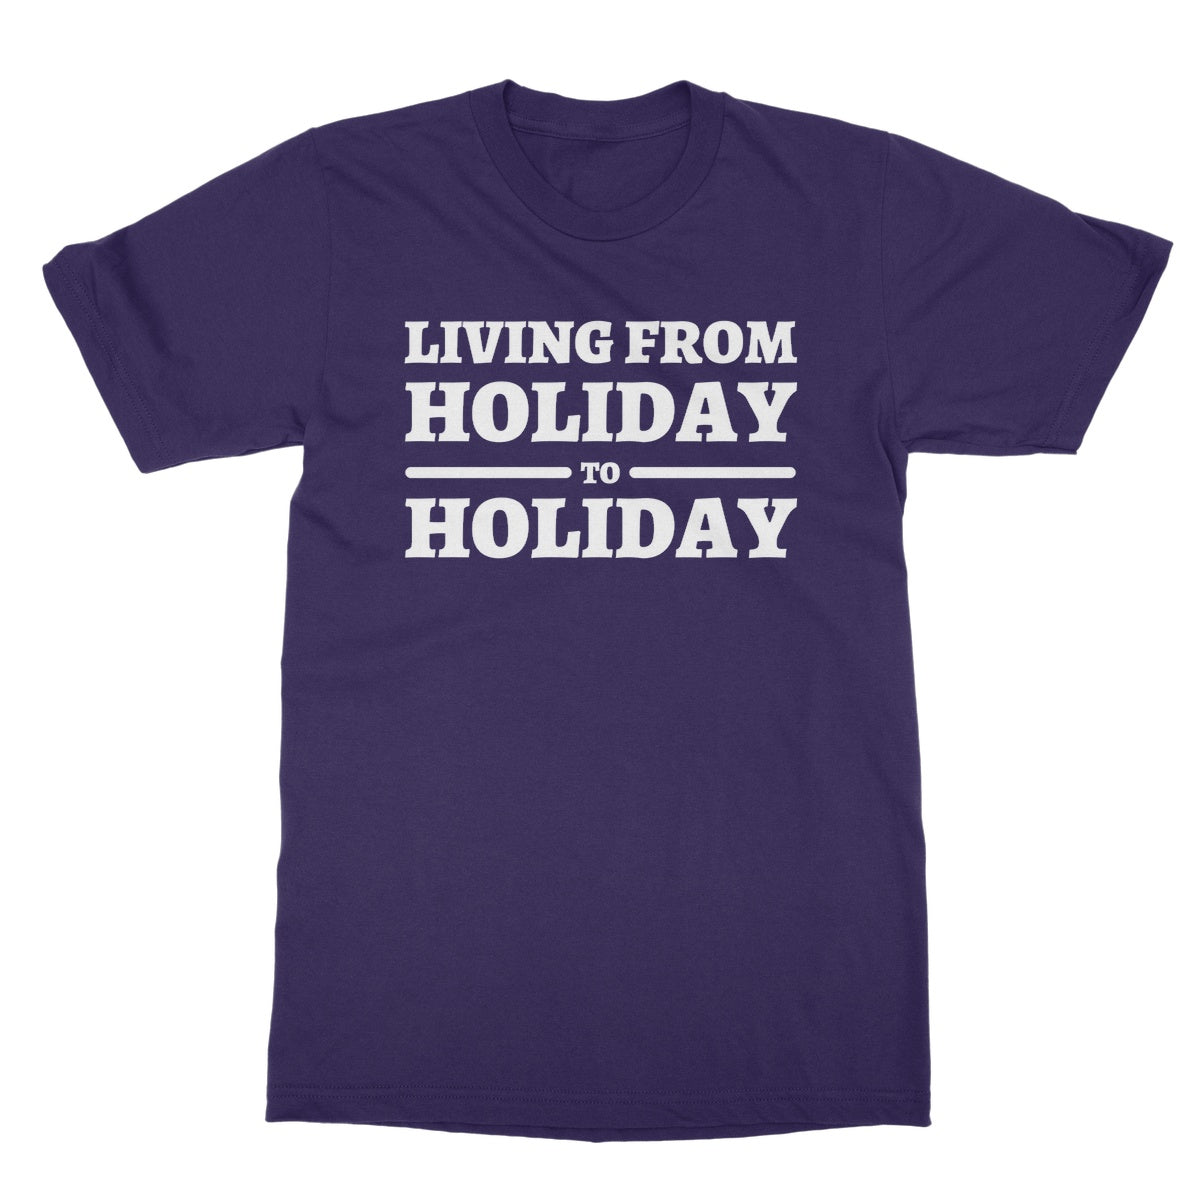 living from holiday to holiday t shirt purple